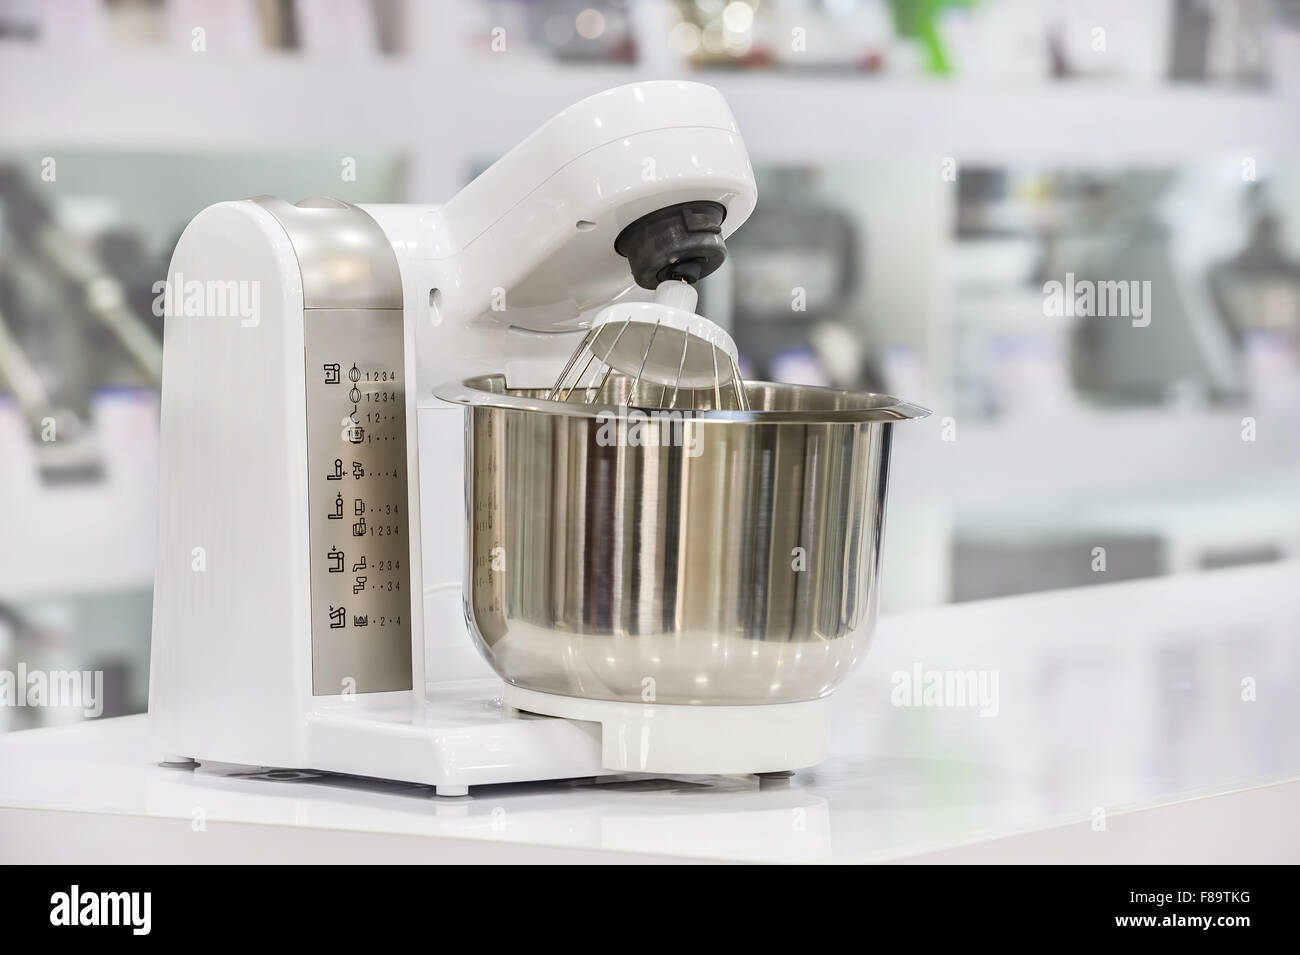 single electric food processor in retail store Stock Photo